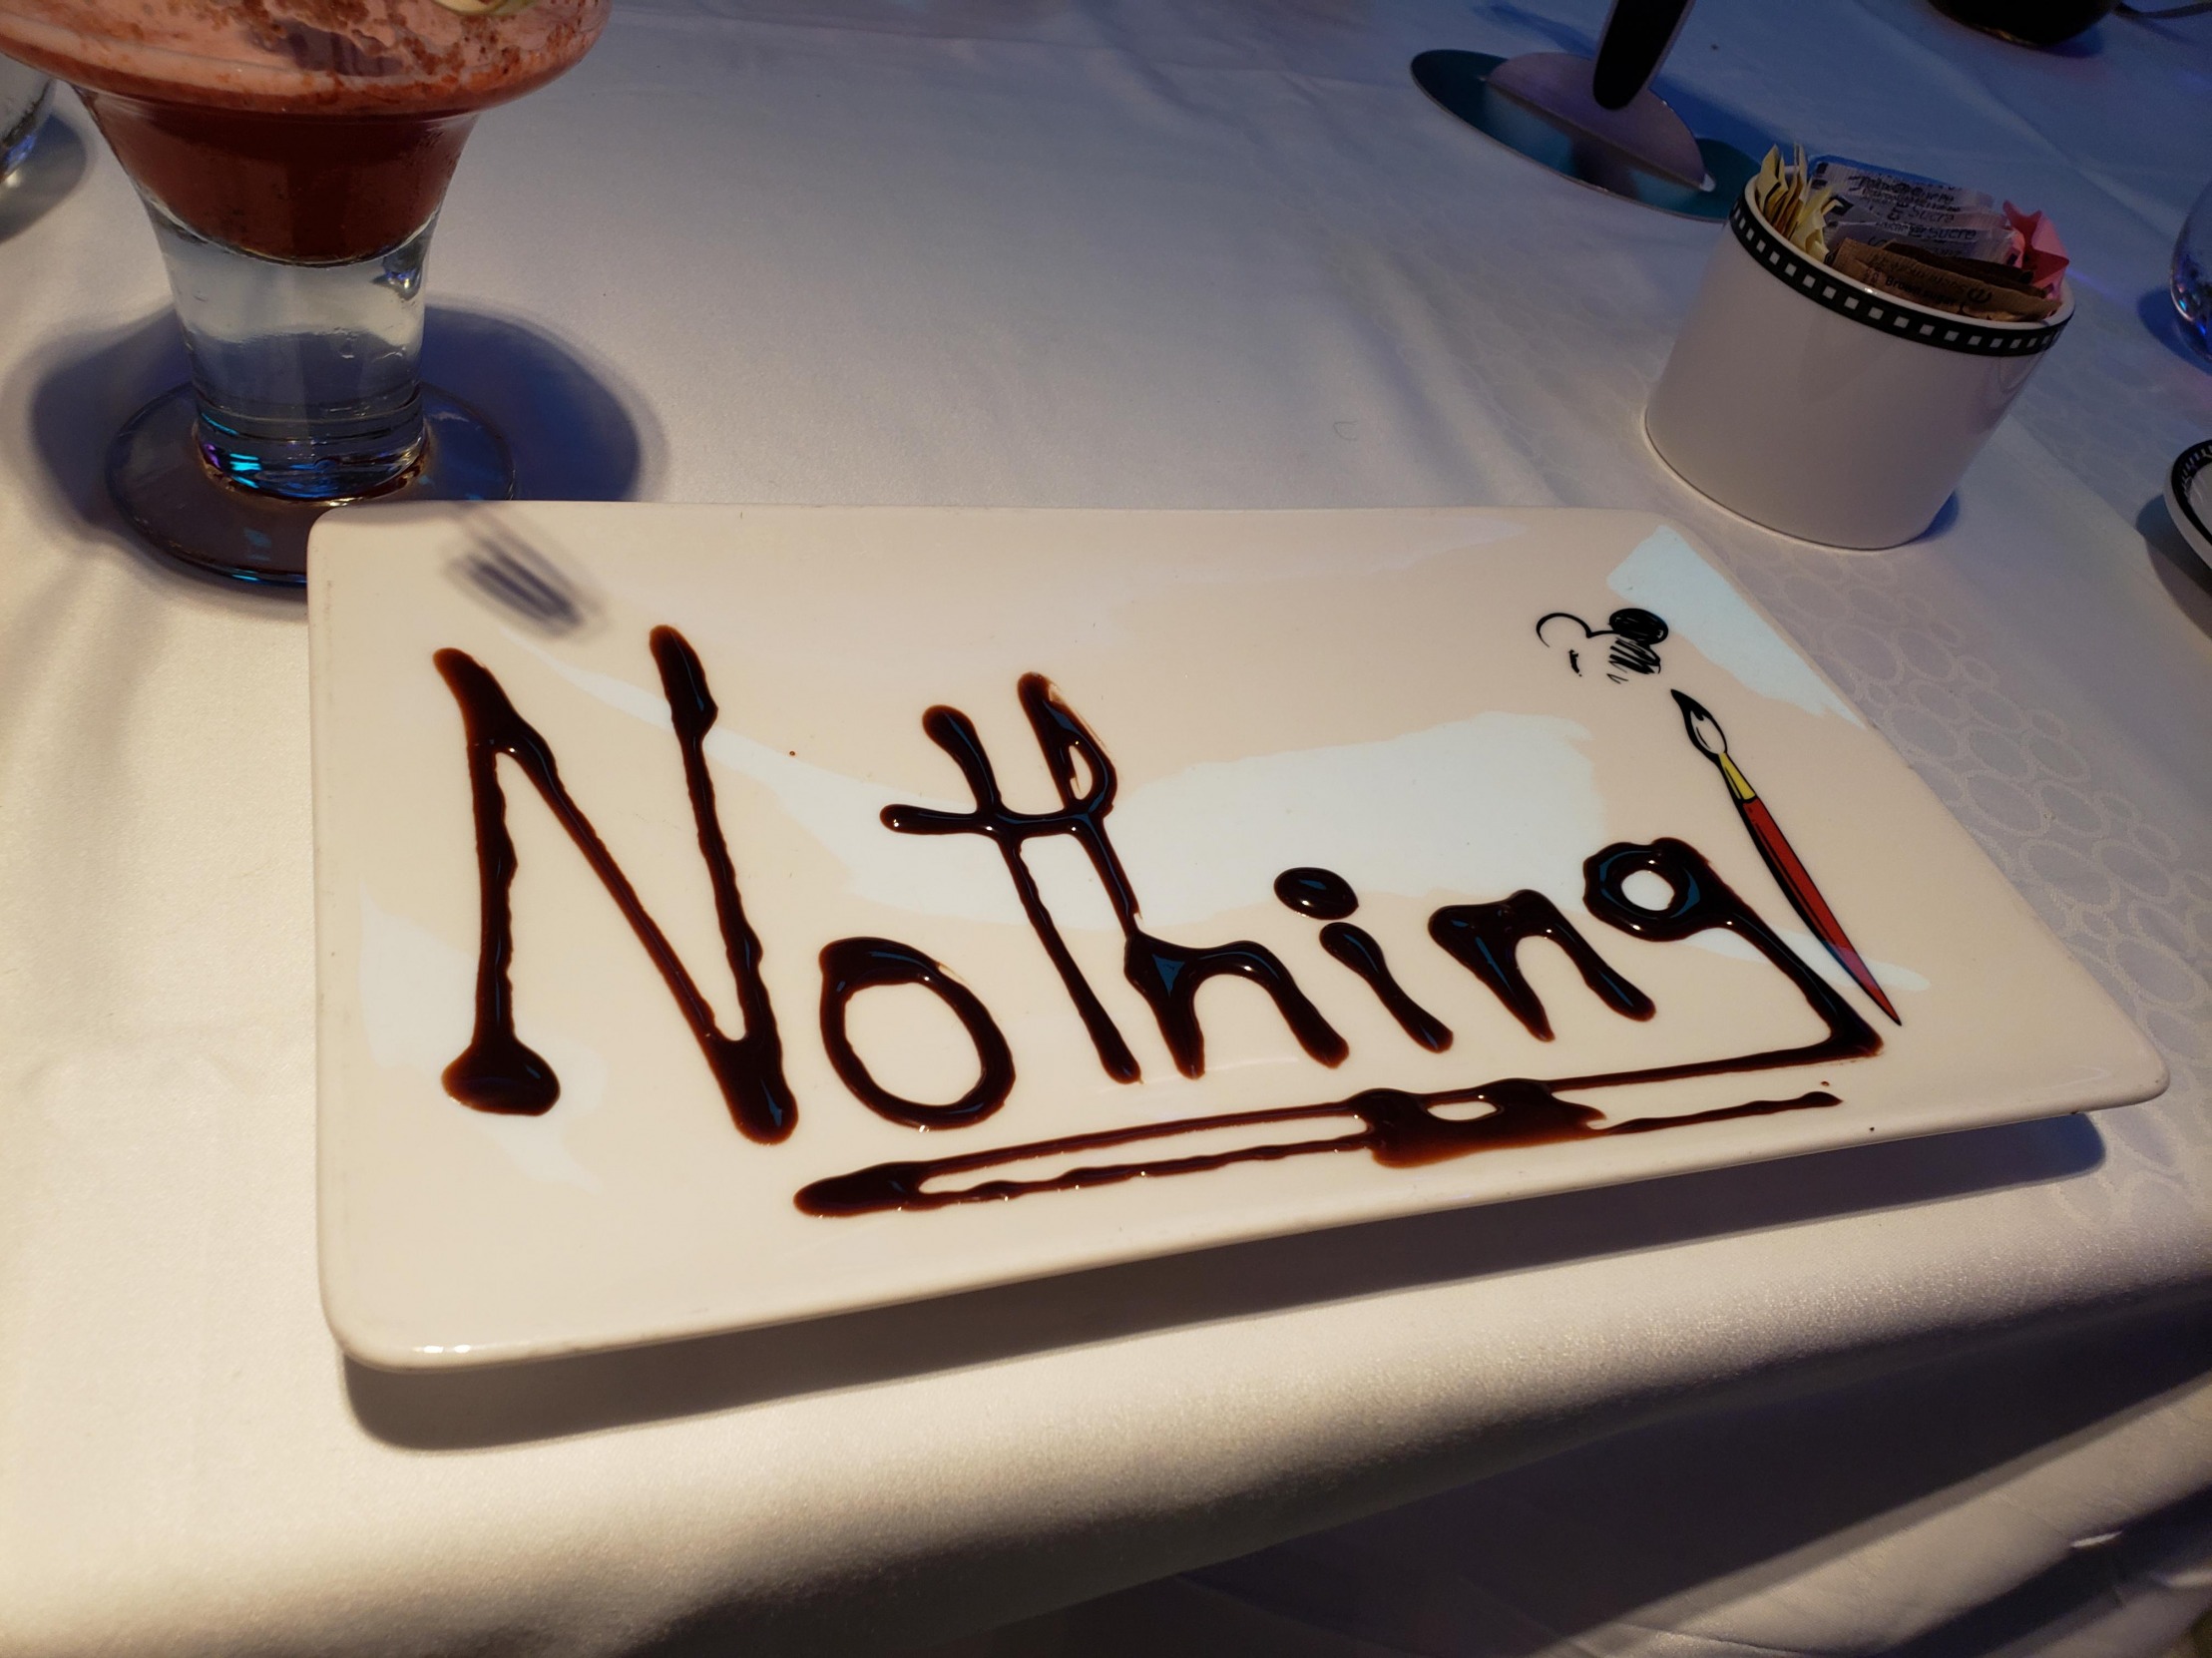 High Quality nothing written in chocolate syrup Blank Meme Template